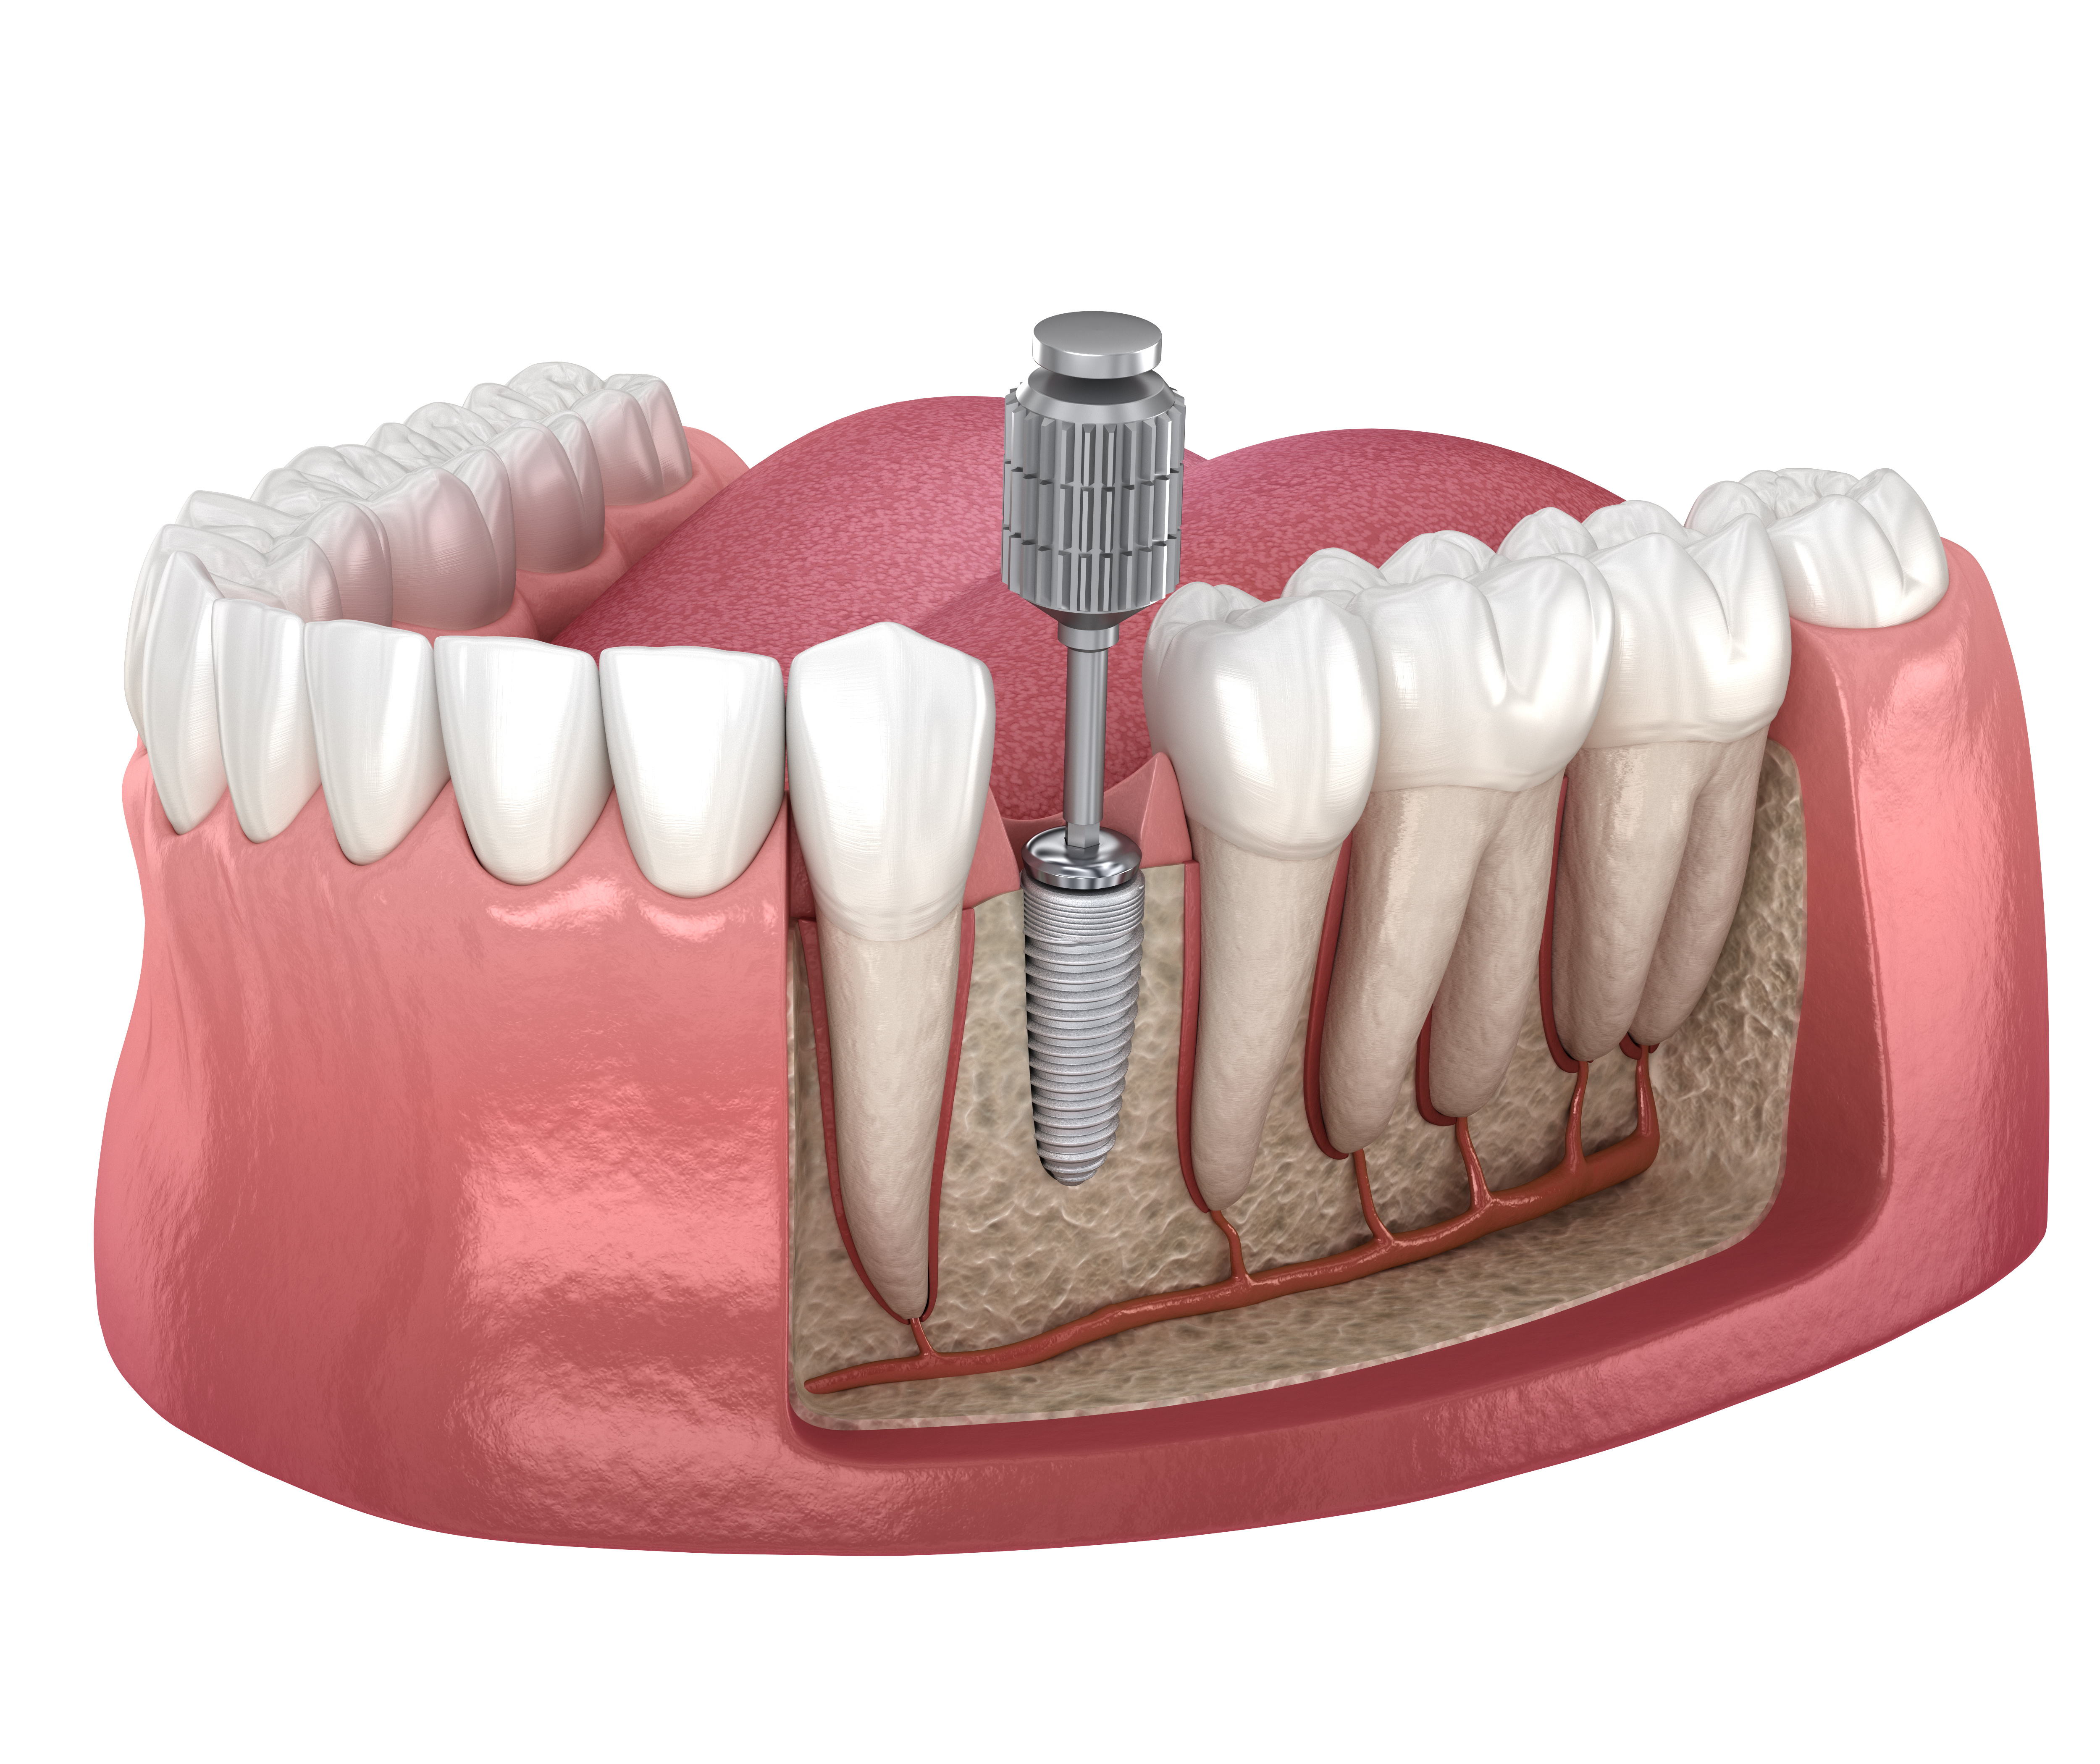 3d illustration, artificial, crown, dent, dental, dentist, dentistry, denture, enamel, example, screwdriver, temporary, illustration, implant, implantat, implantation, implanted, injection, install, installation, jaw, cover, screw, molar, prosthesis, prosthetic, recovery, root, surgery, teeth, titanium, tooth, transparent, treatment, orthodontic, fixation, gum, premolar, installed, abutment, render